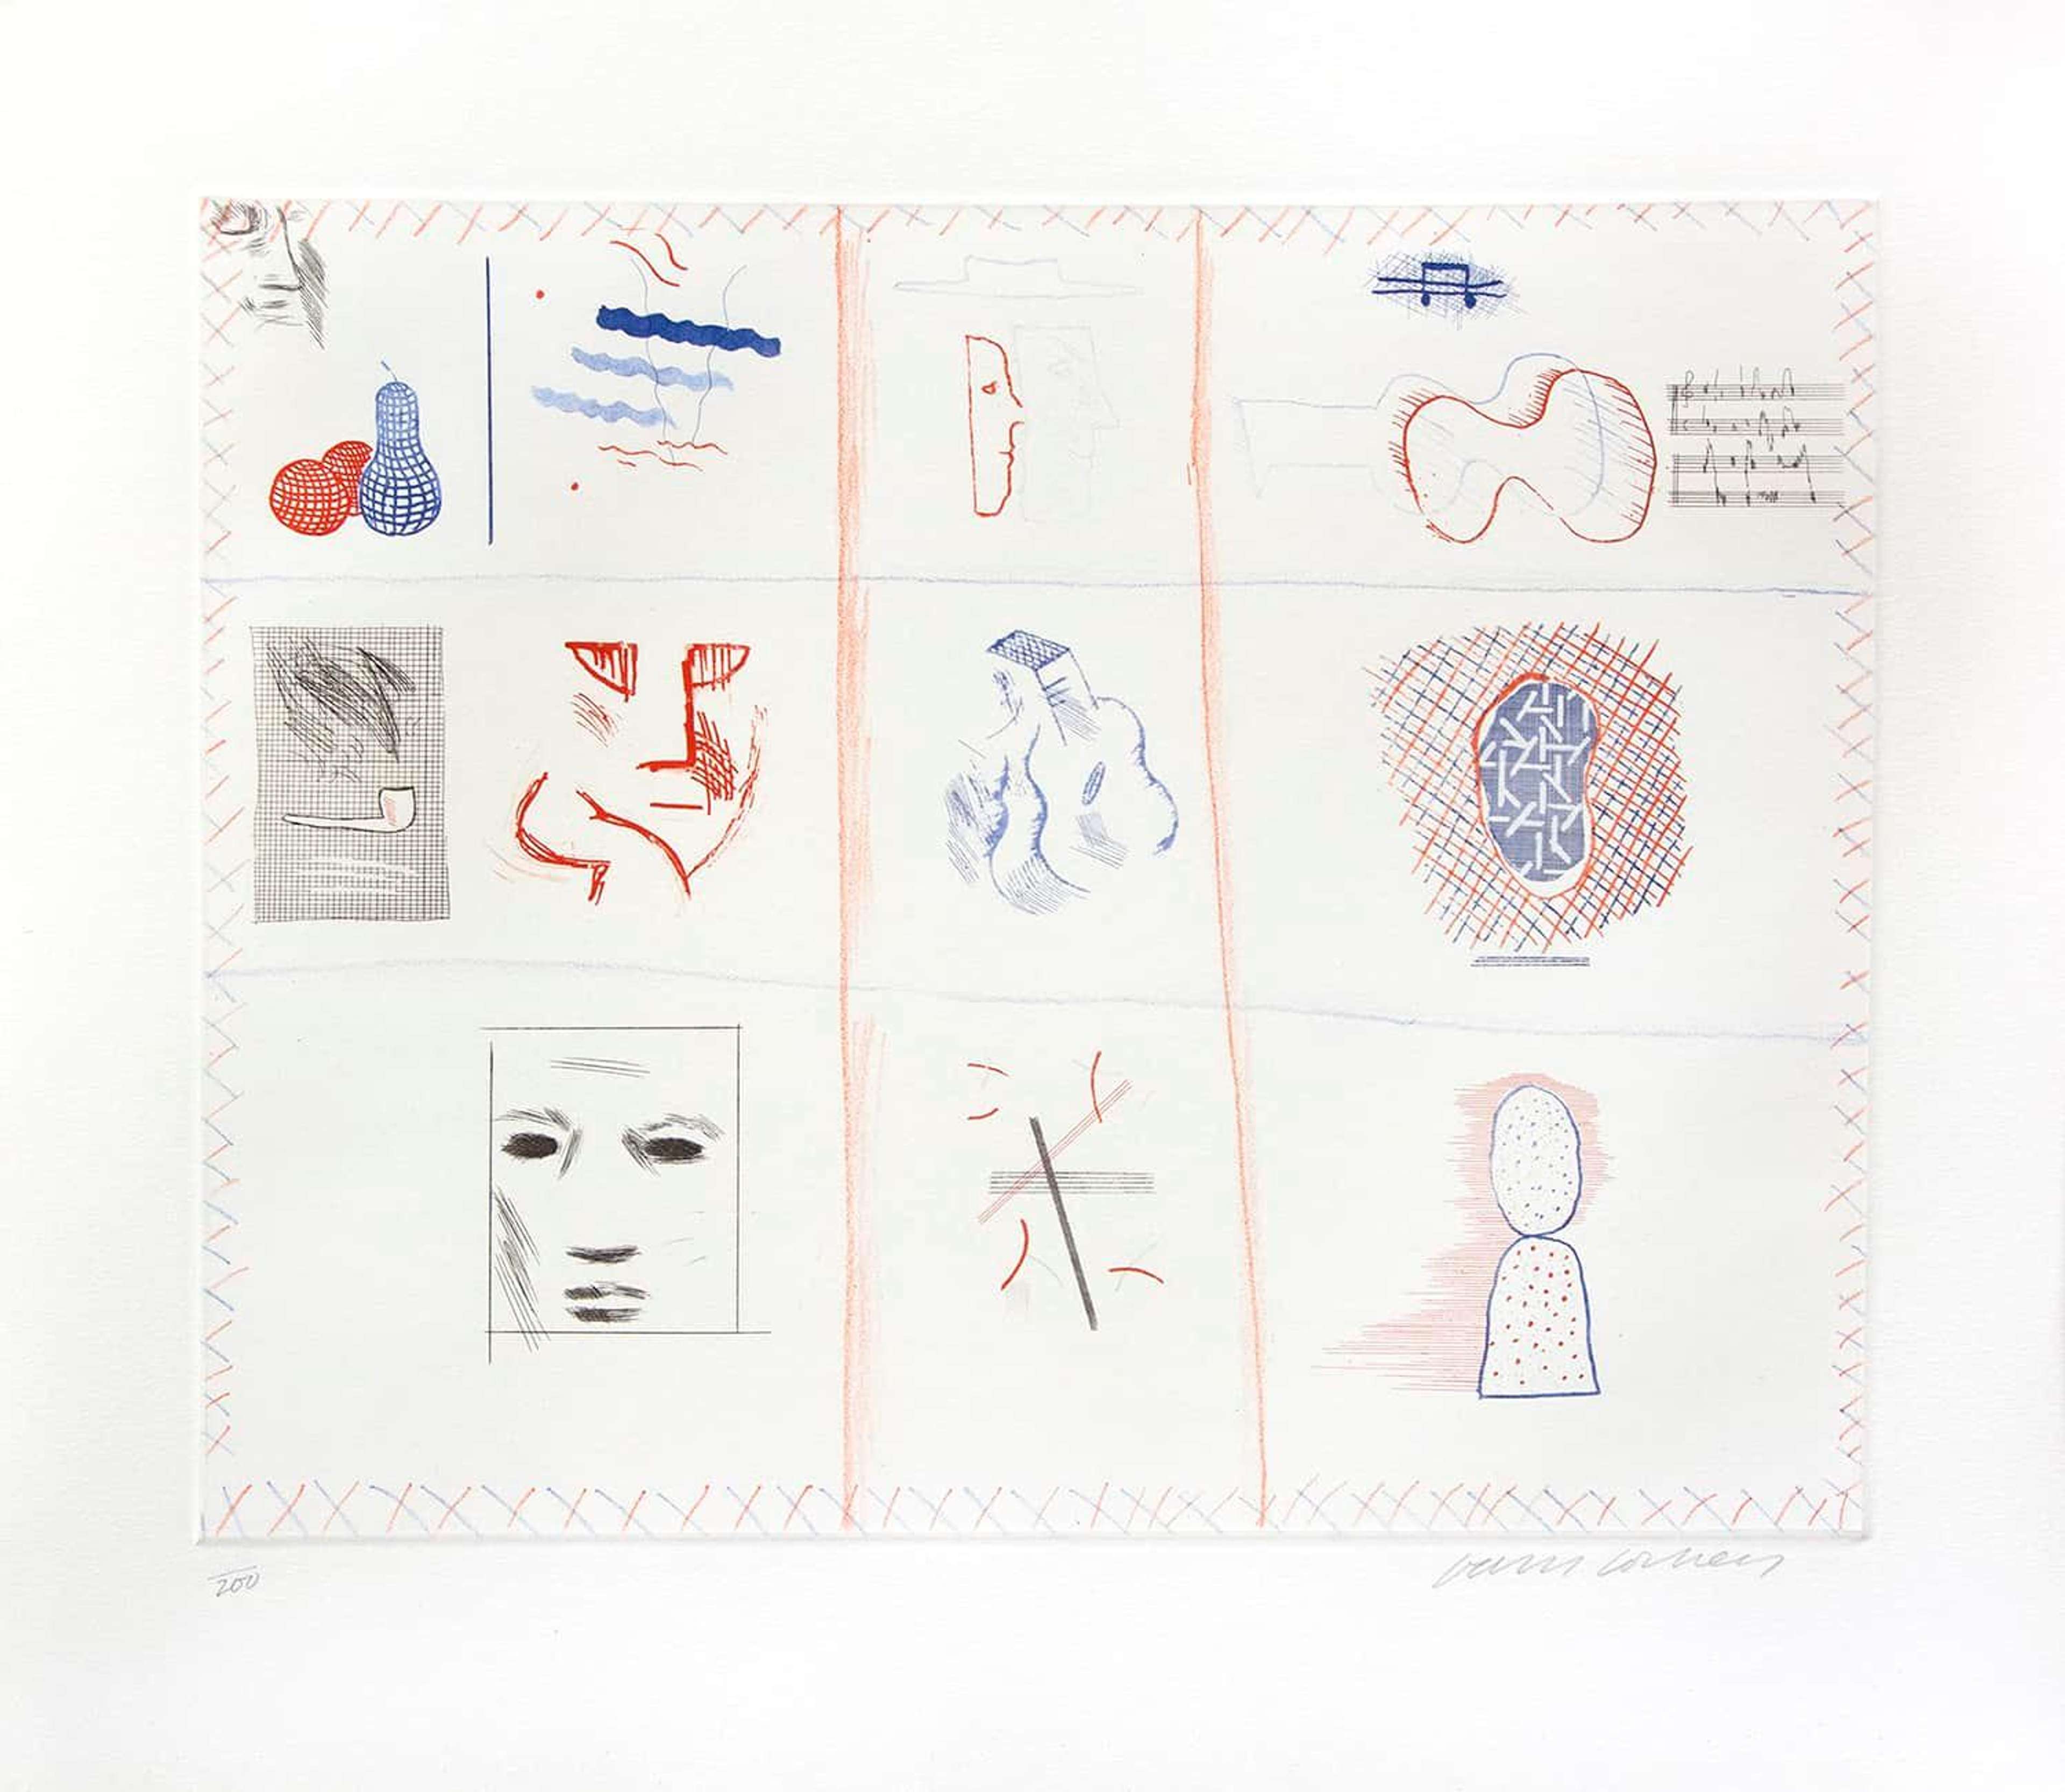 David Hockney’s Franco-American Mail. An etching of an envelope with nine squares filled with an assortment of images.